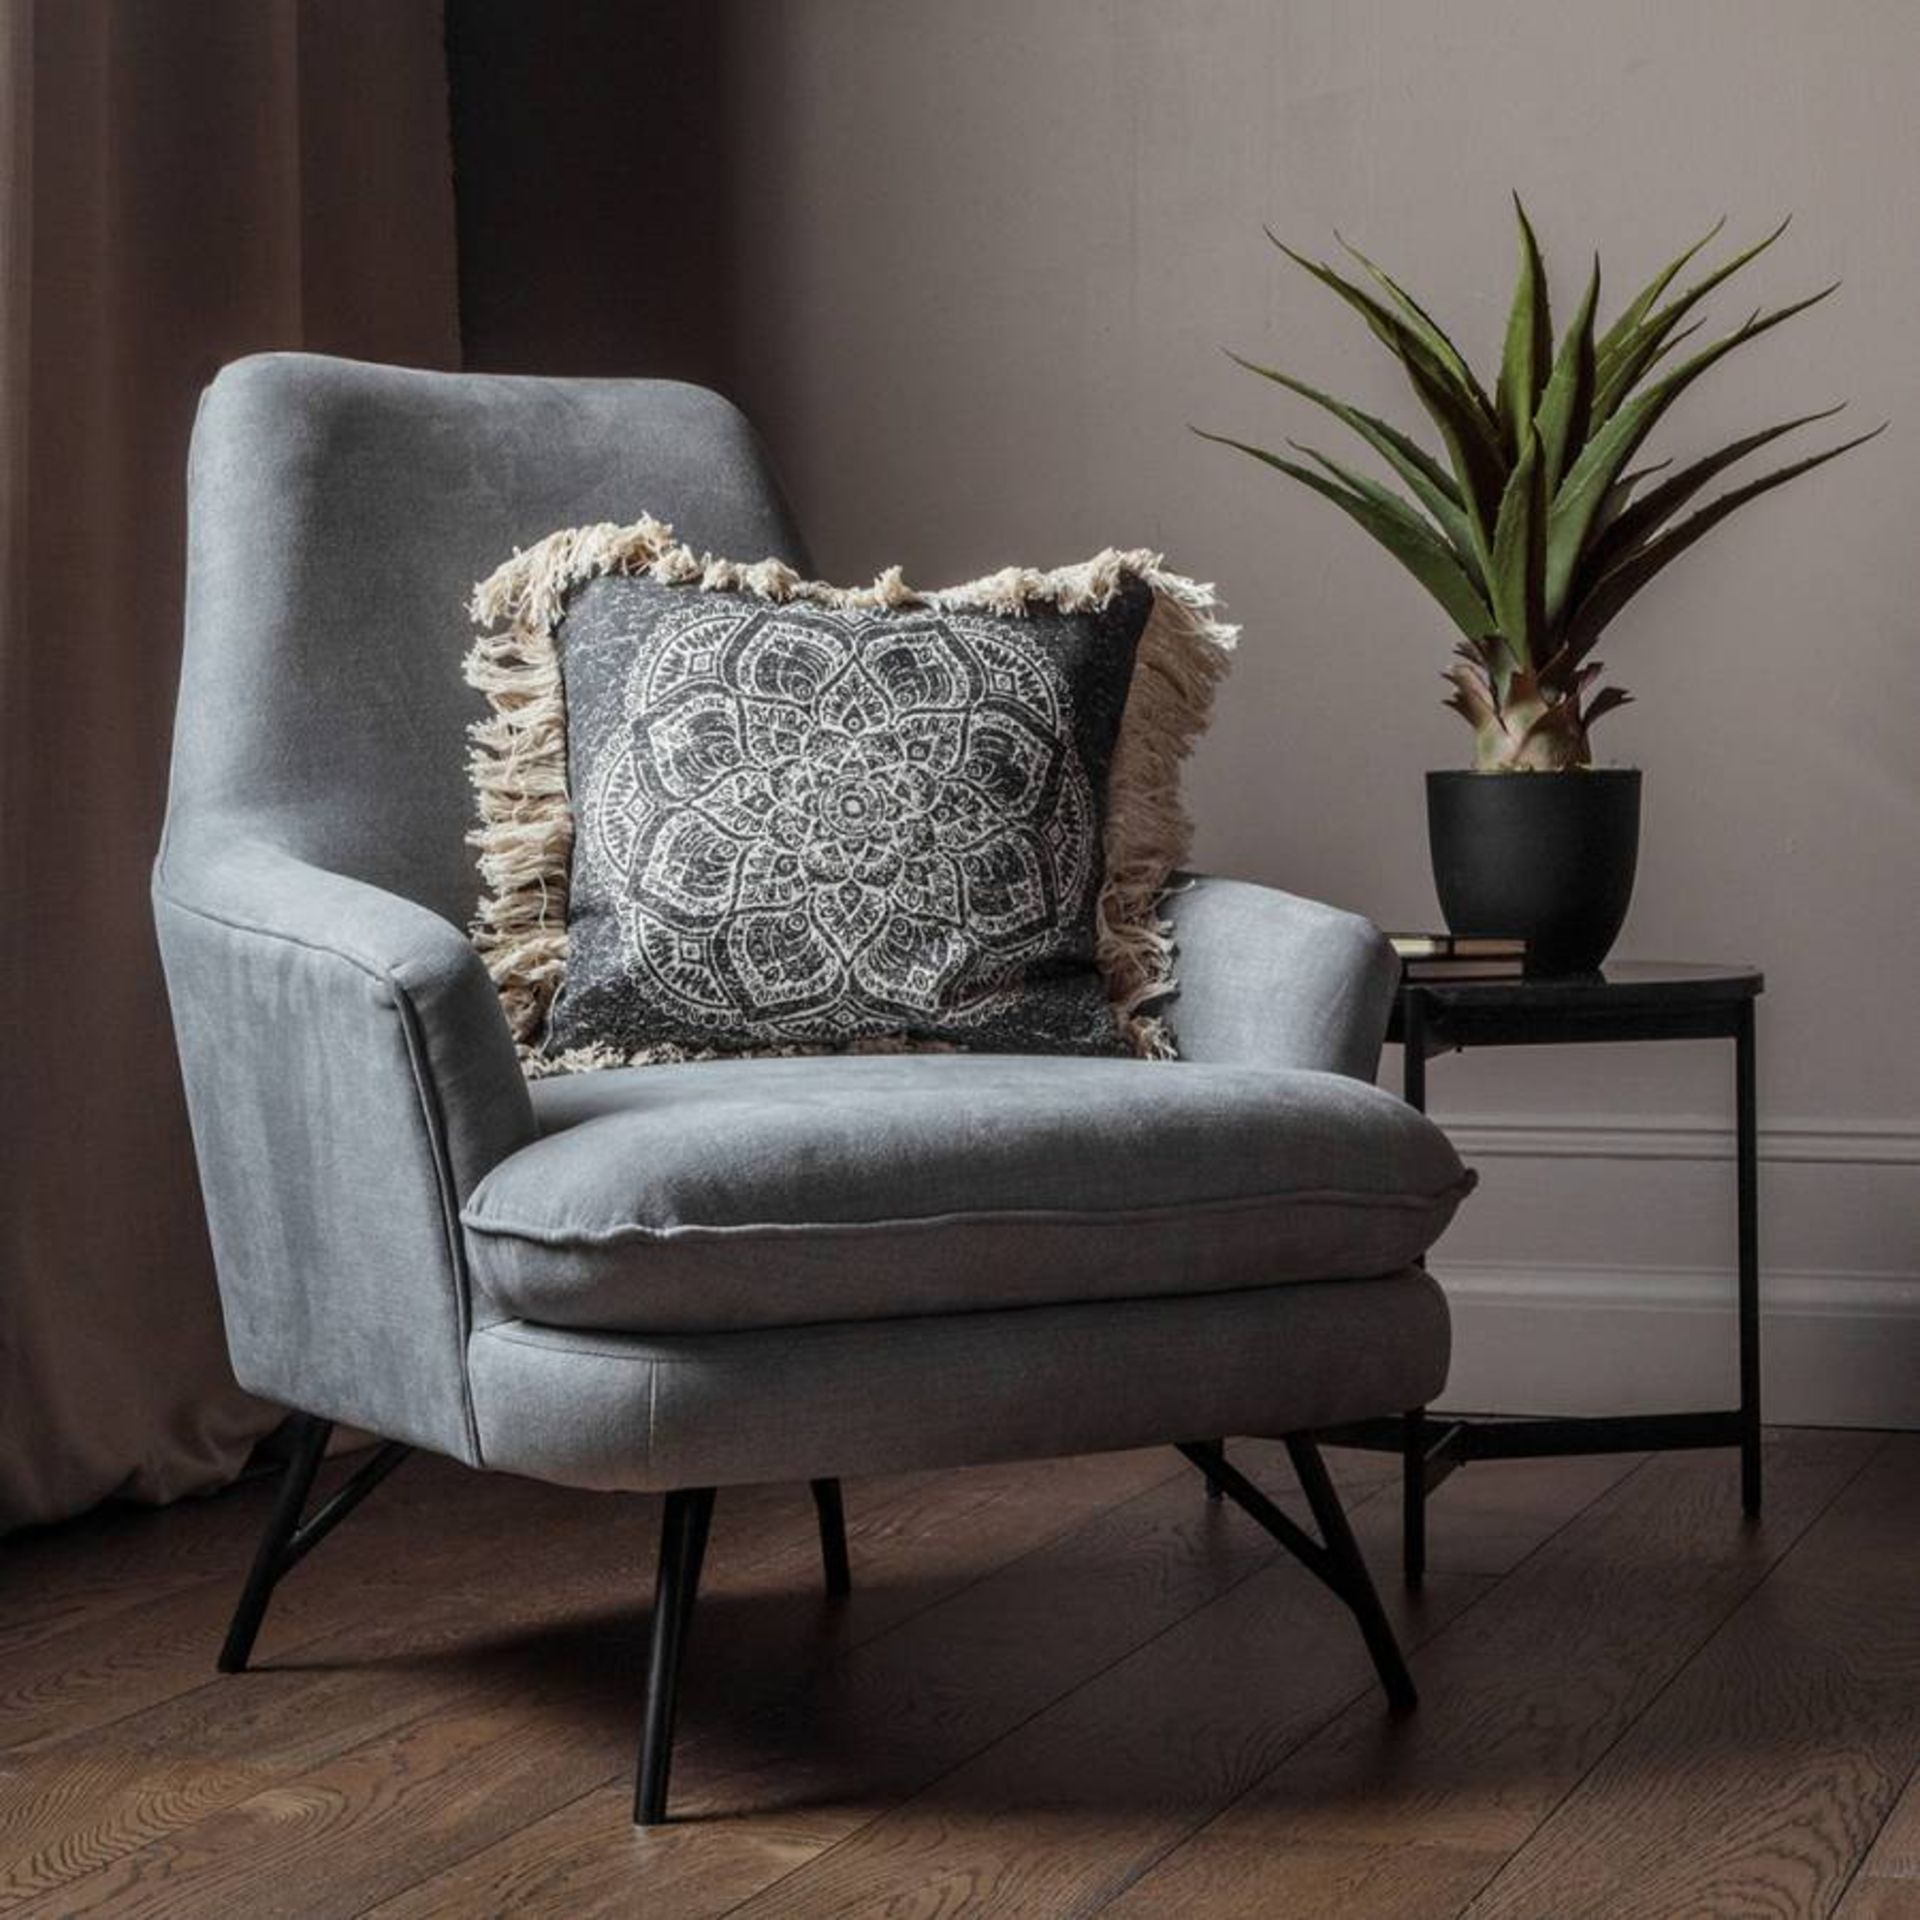 Radlett Chair Bailey Pewter W810 x D850 x H890mm Make Your Home Interior Stand Out When You